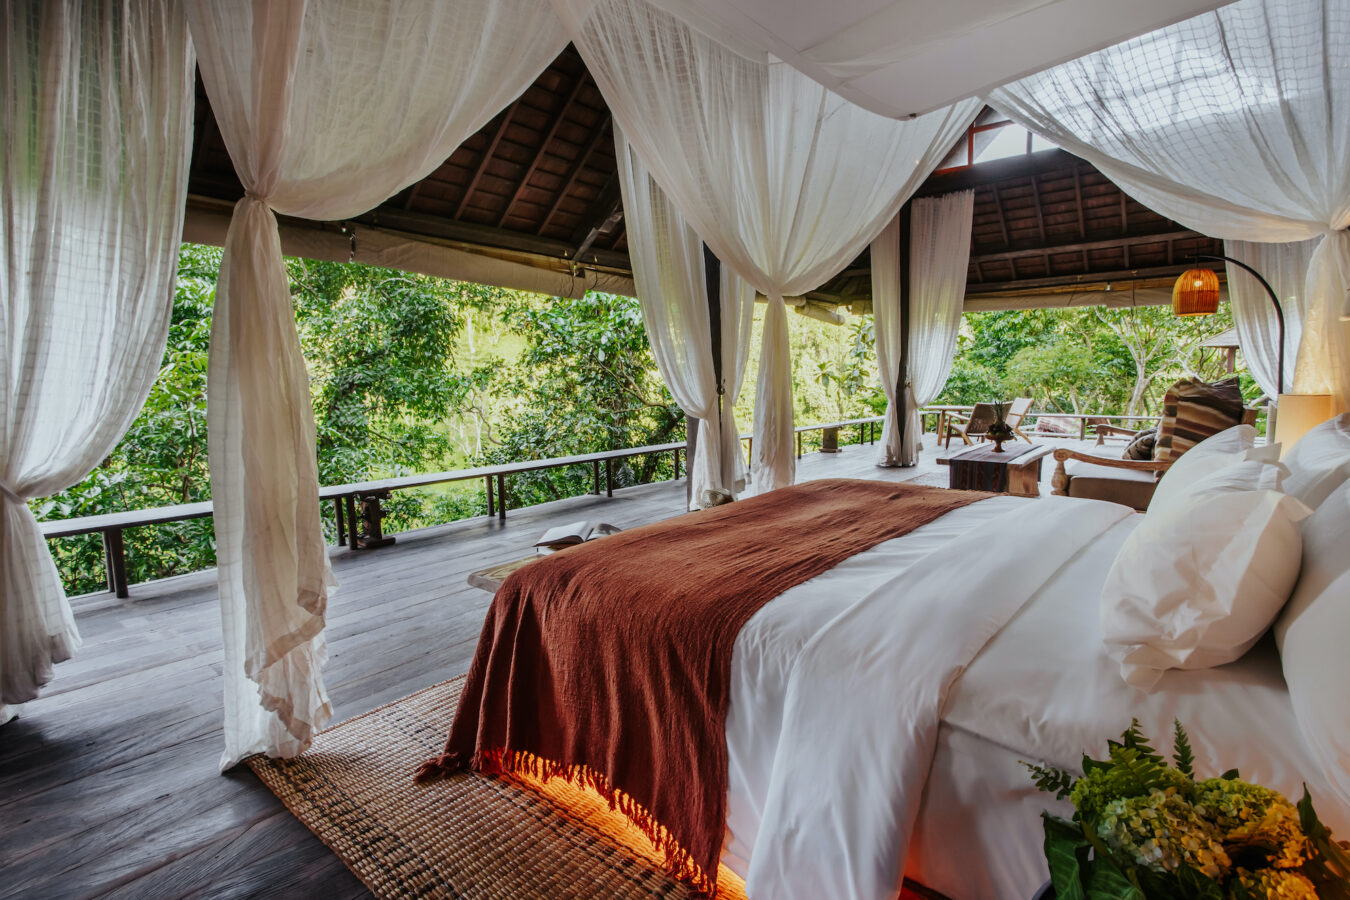 Buahan, a Banyan Tree Escape Launches Exclusive Women’s Retreat With Beyond